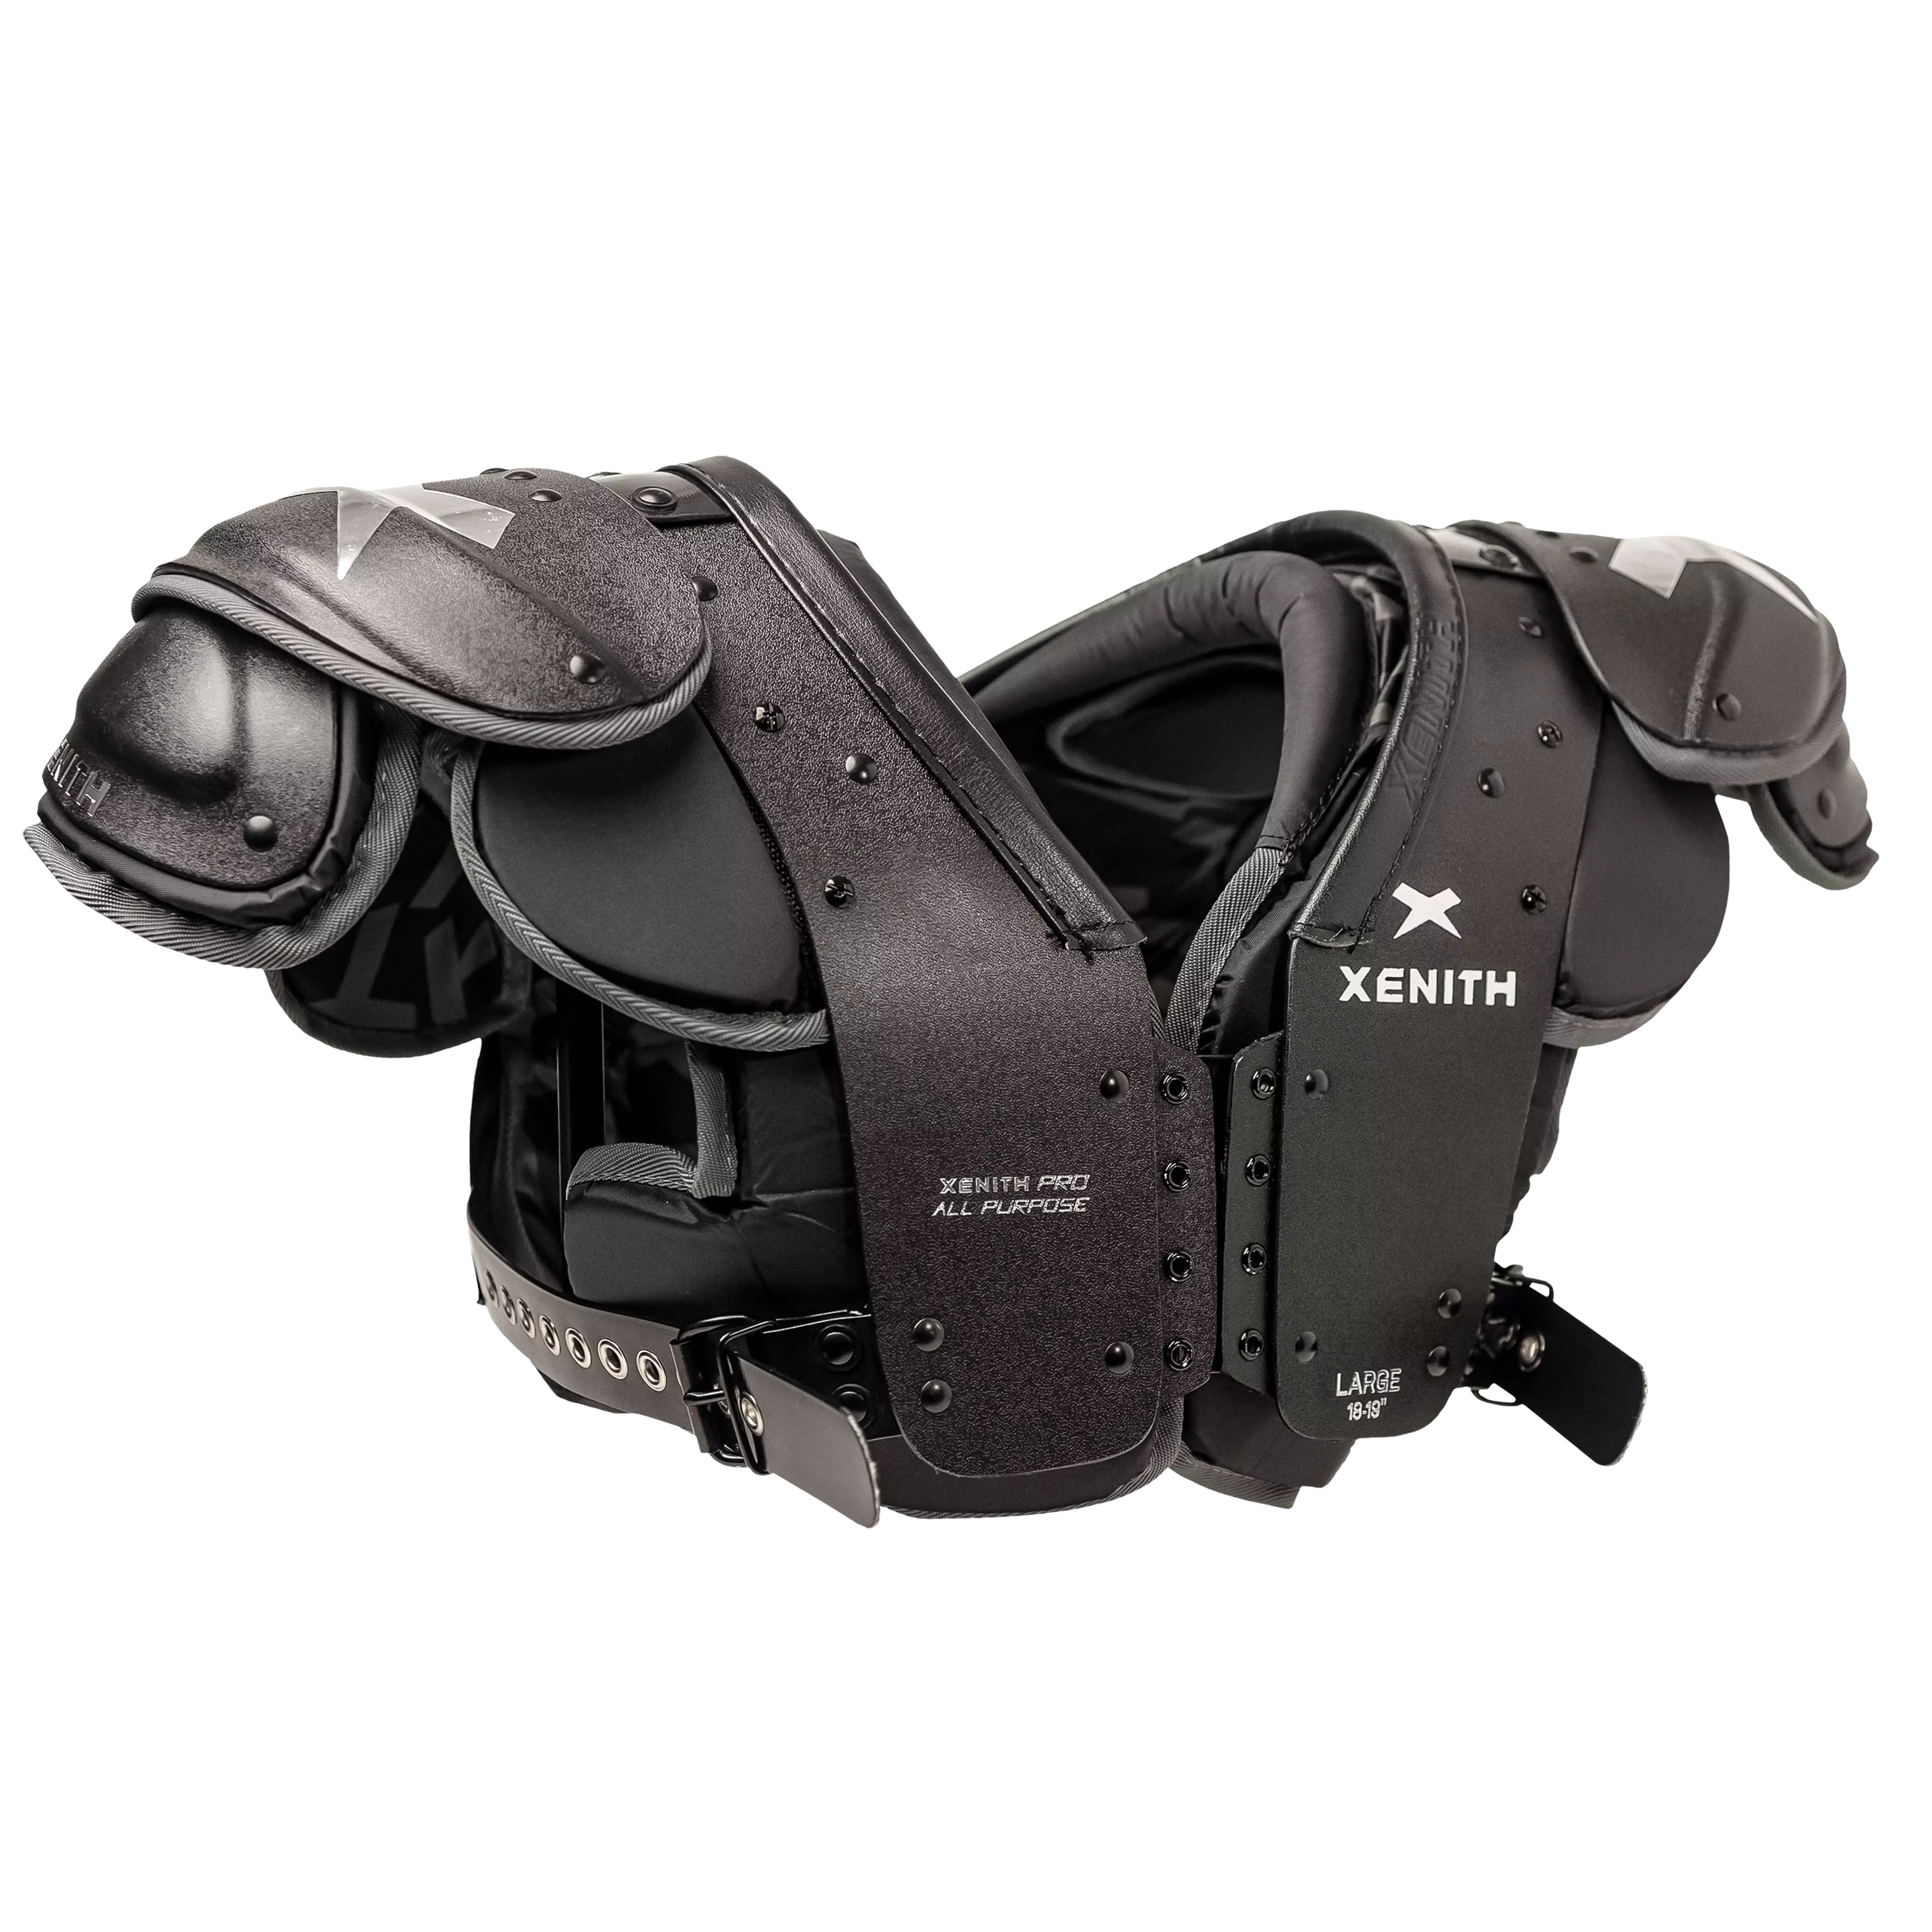 Right facing view of Xenith Pro All Purpose shoulder pads.